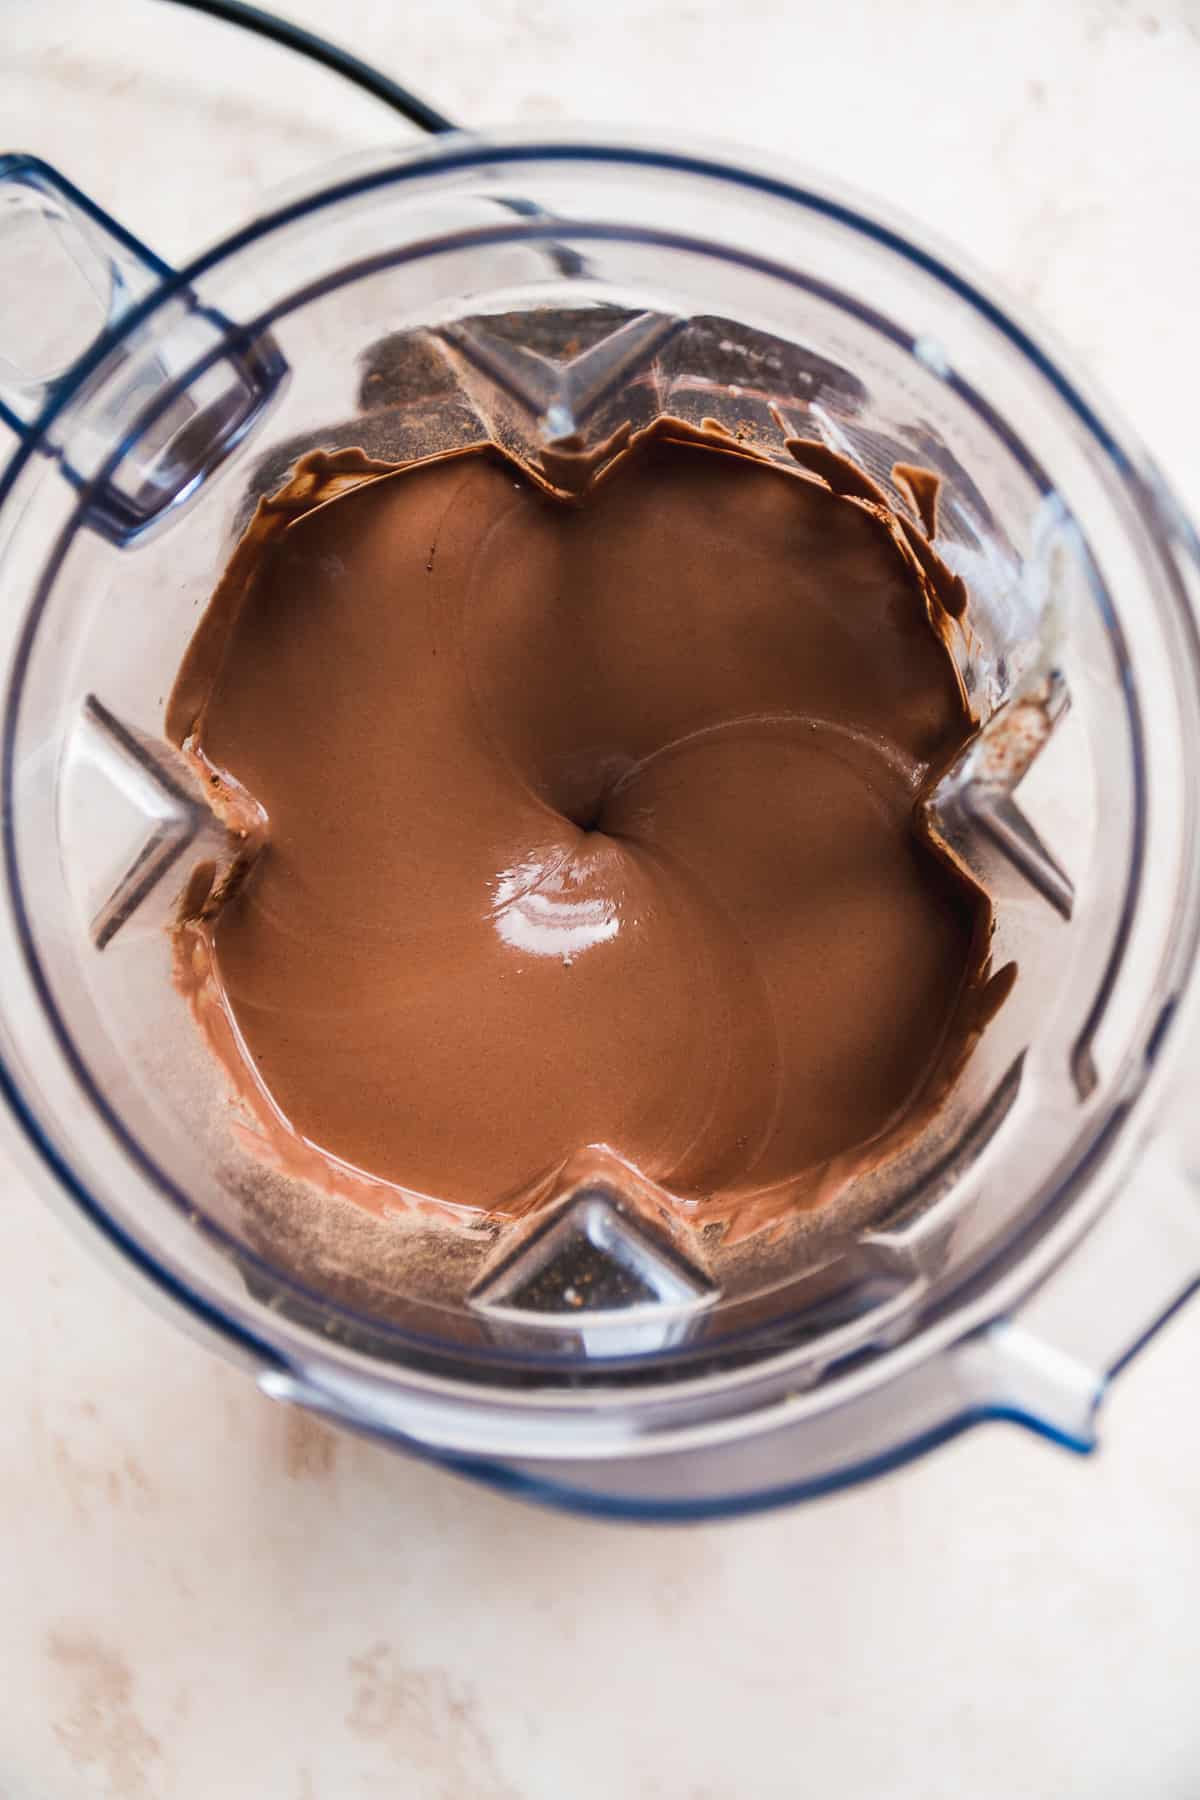 Overhead view of a blender with chocolate yogurt mixture.